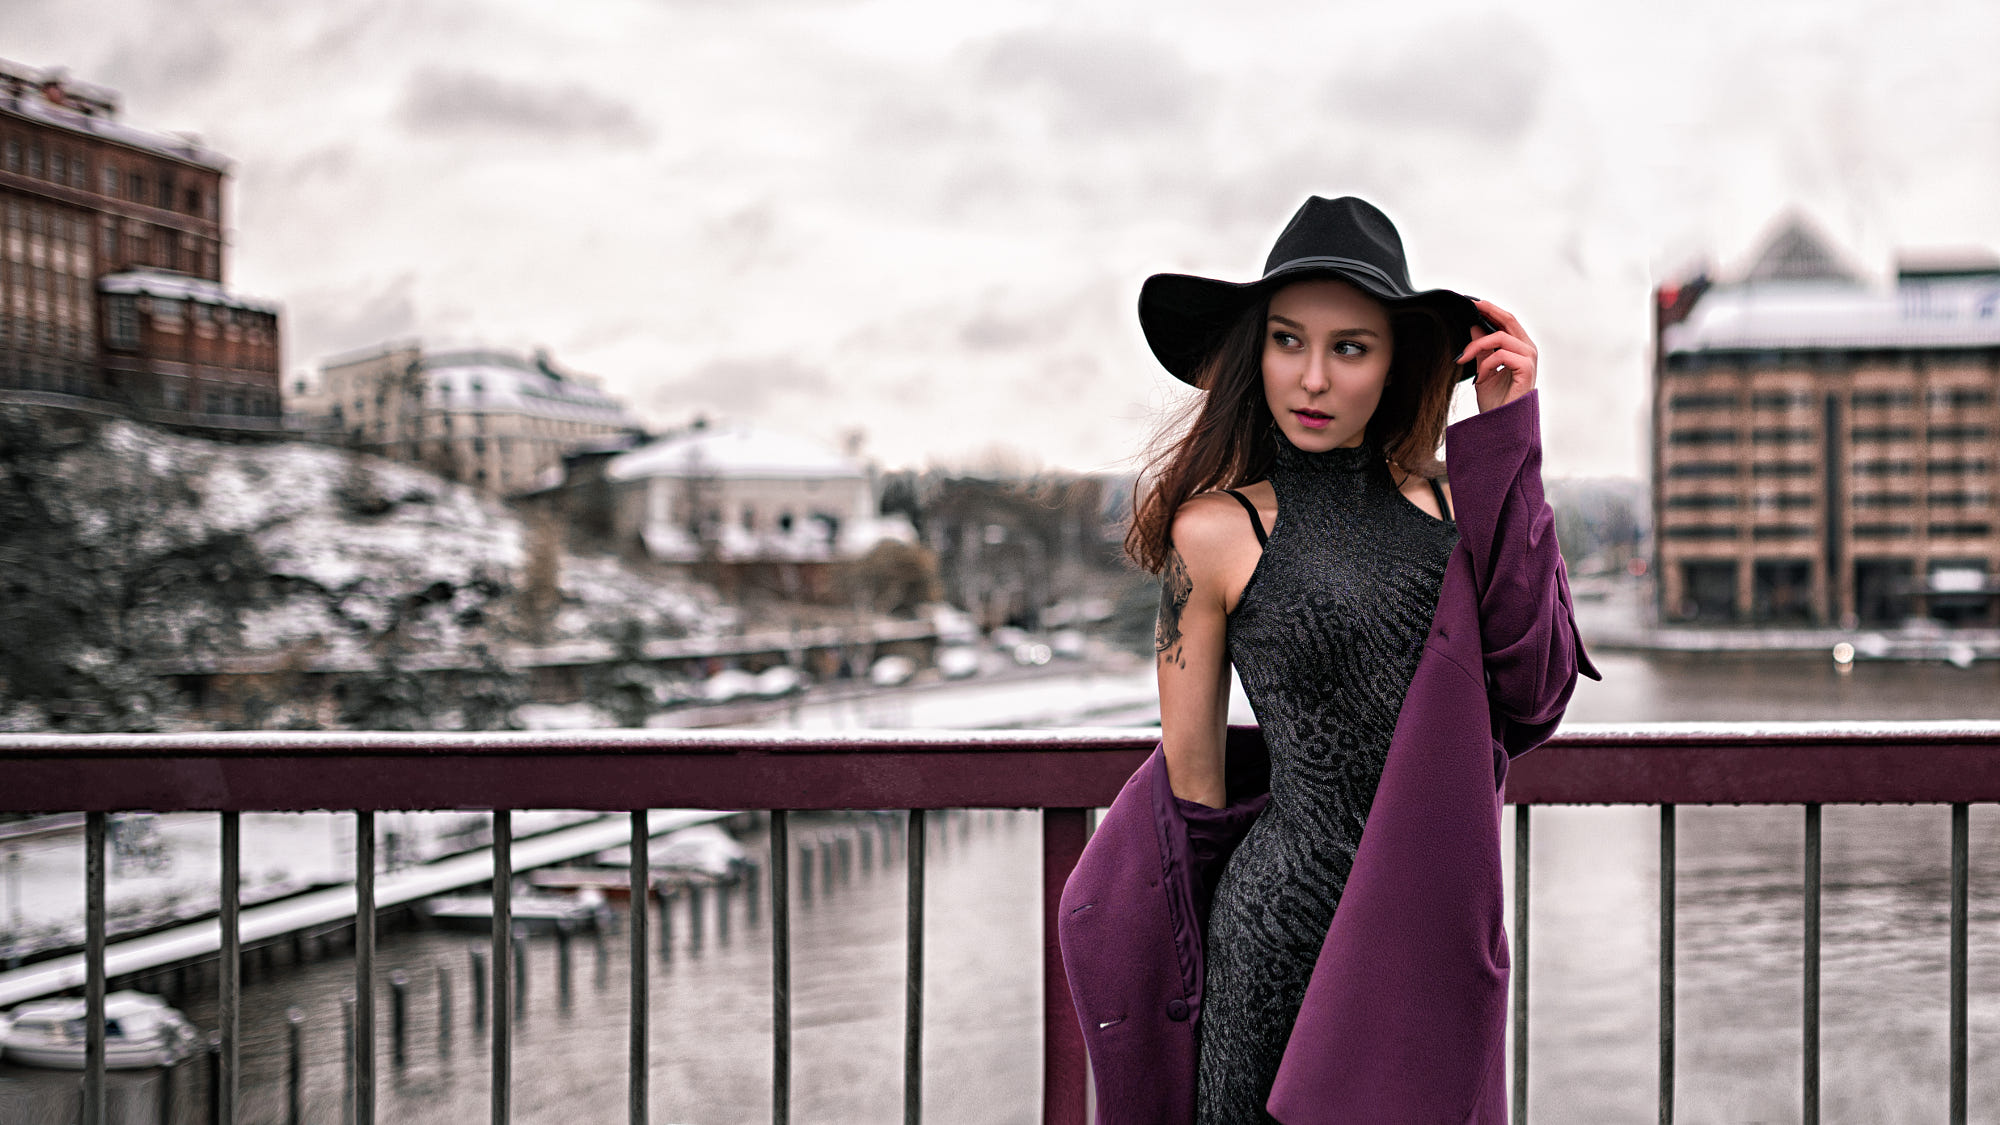 Icona Pictura Women 500px Photography Winter Purple Coat Coats Black Hat Hat Women With Hats Open Co 2000x1125